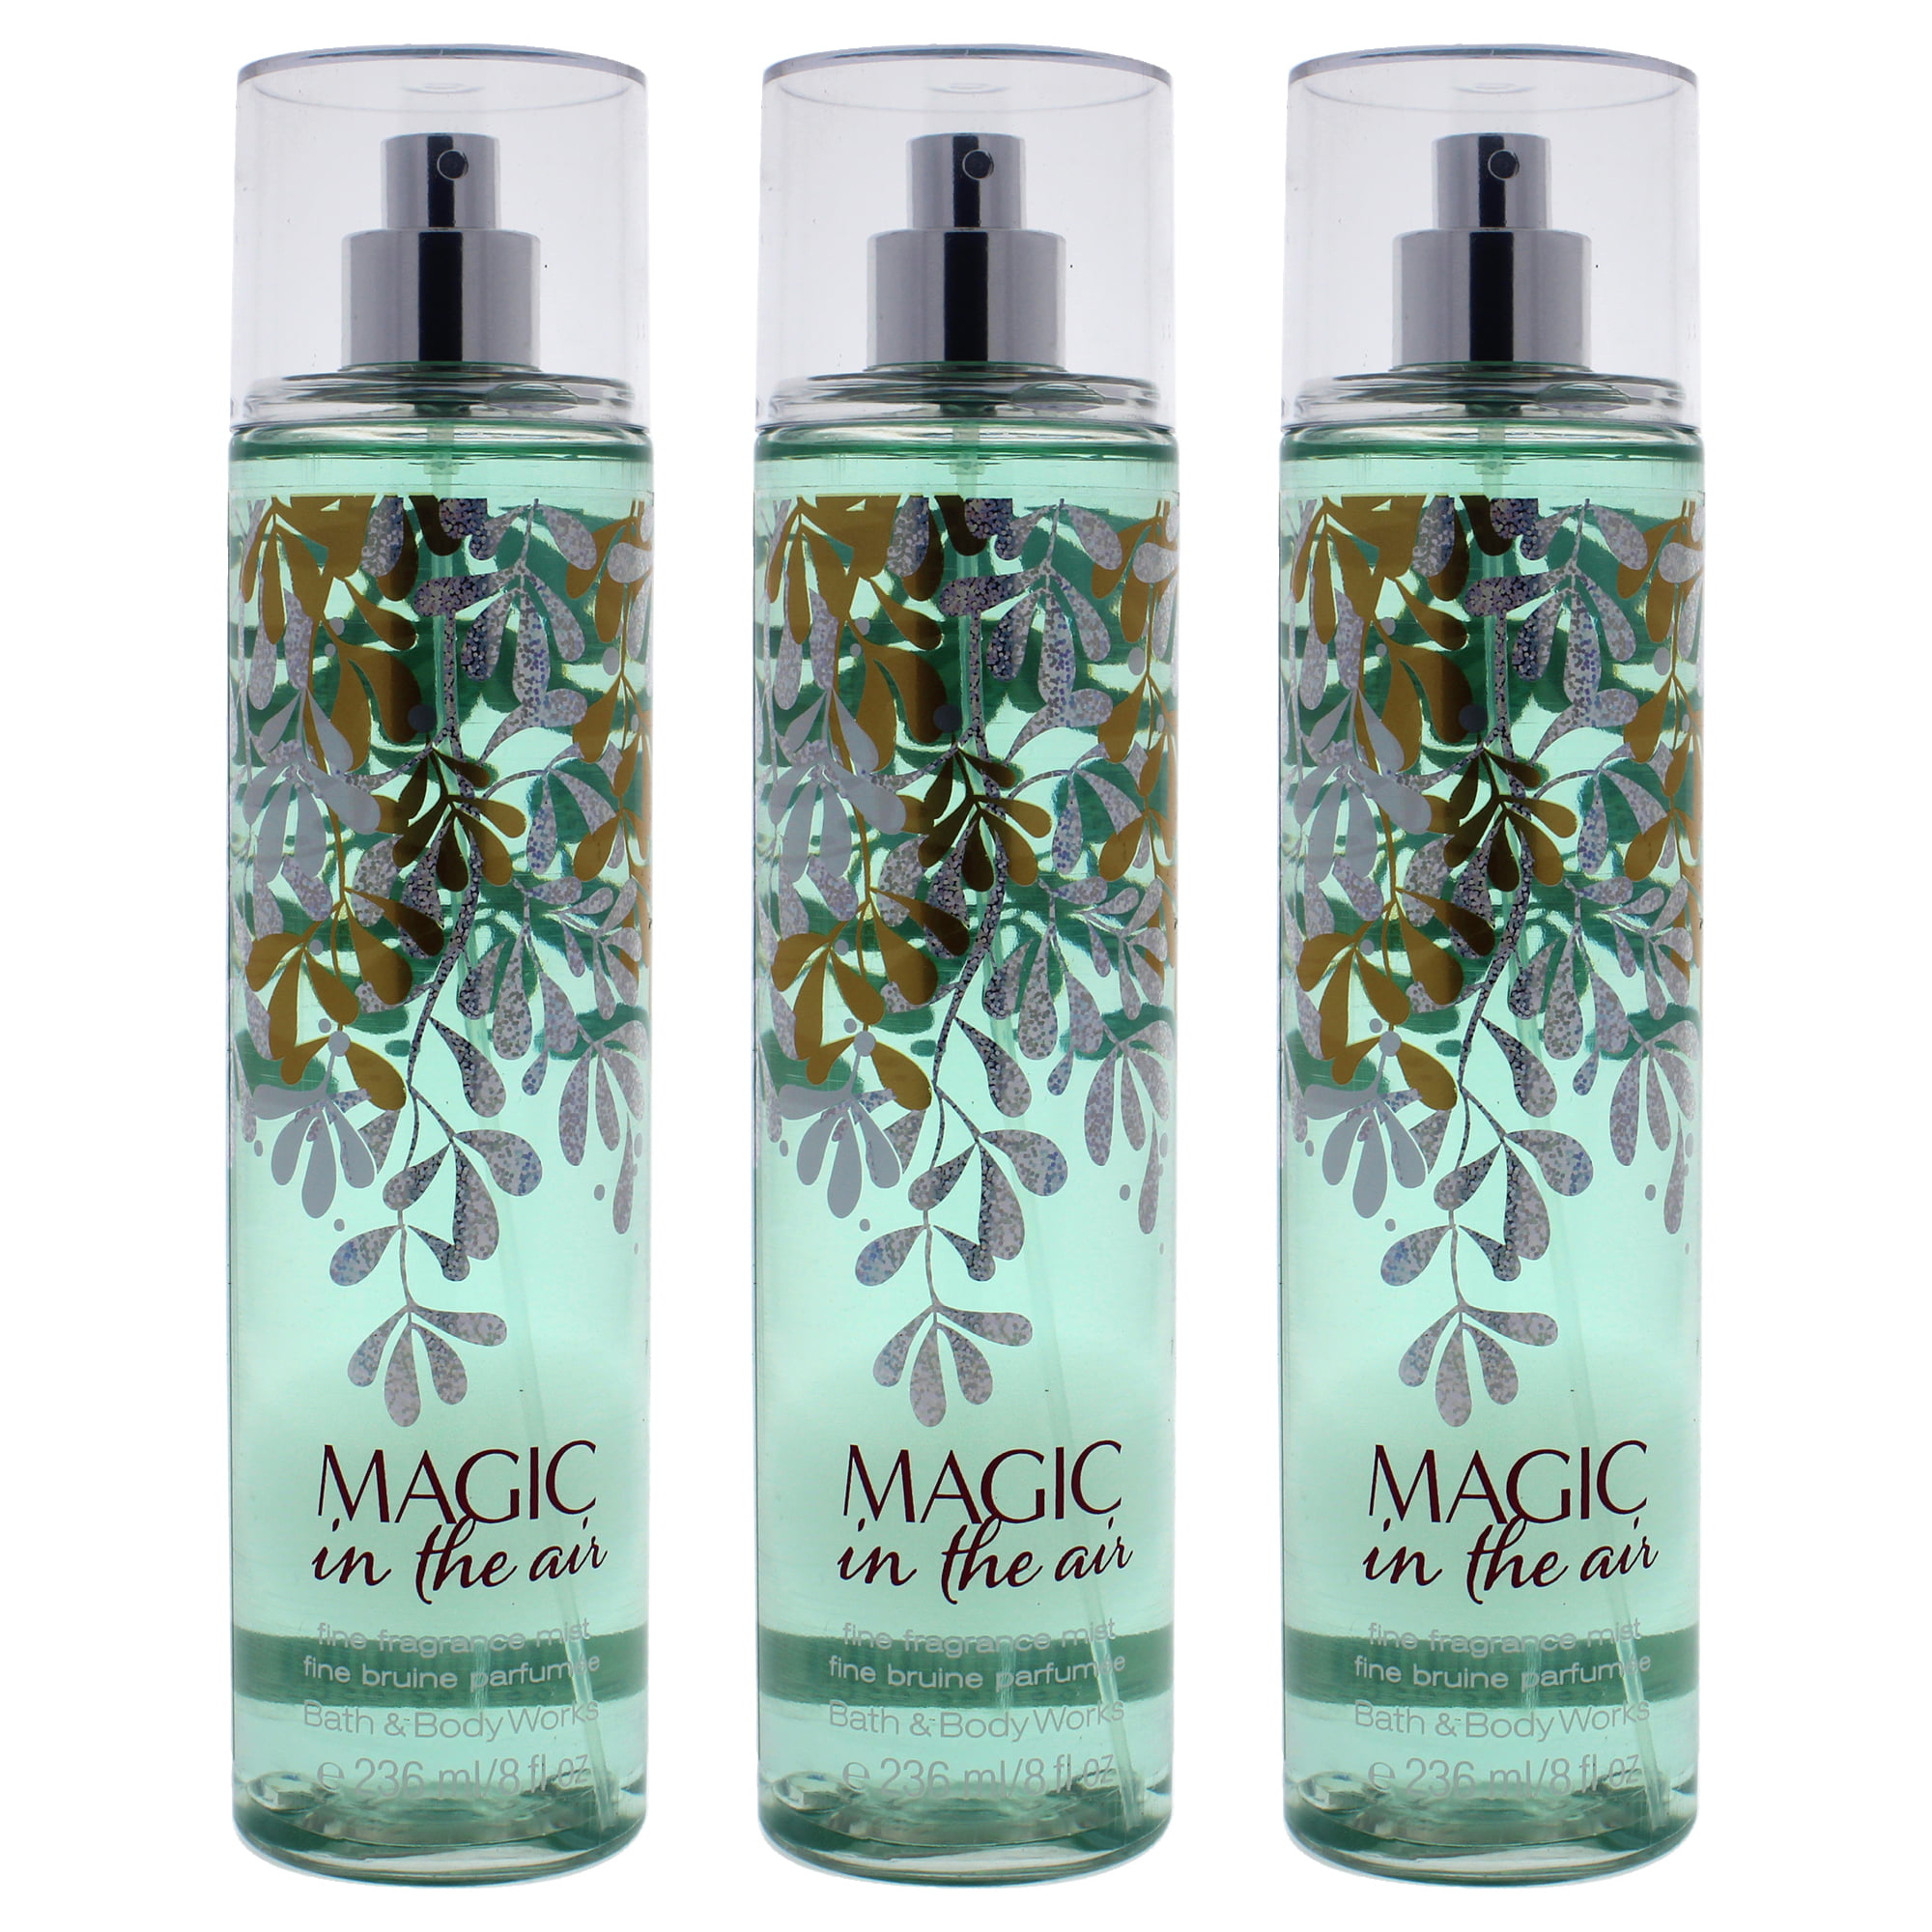 Reviewing Bath & Body Works' Magic in the air - An underrated gem - It's  Kan 